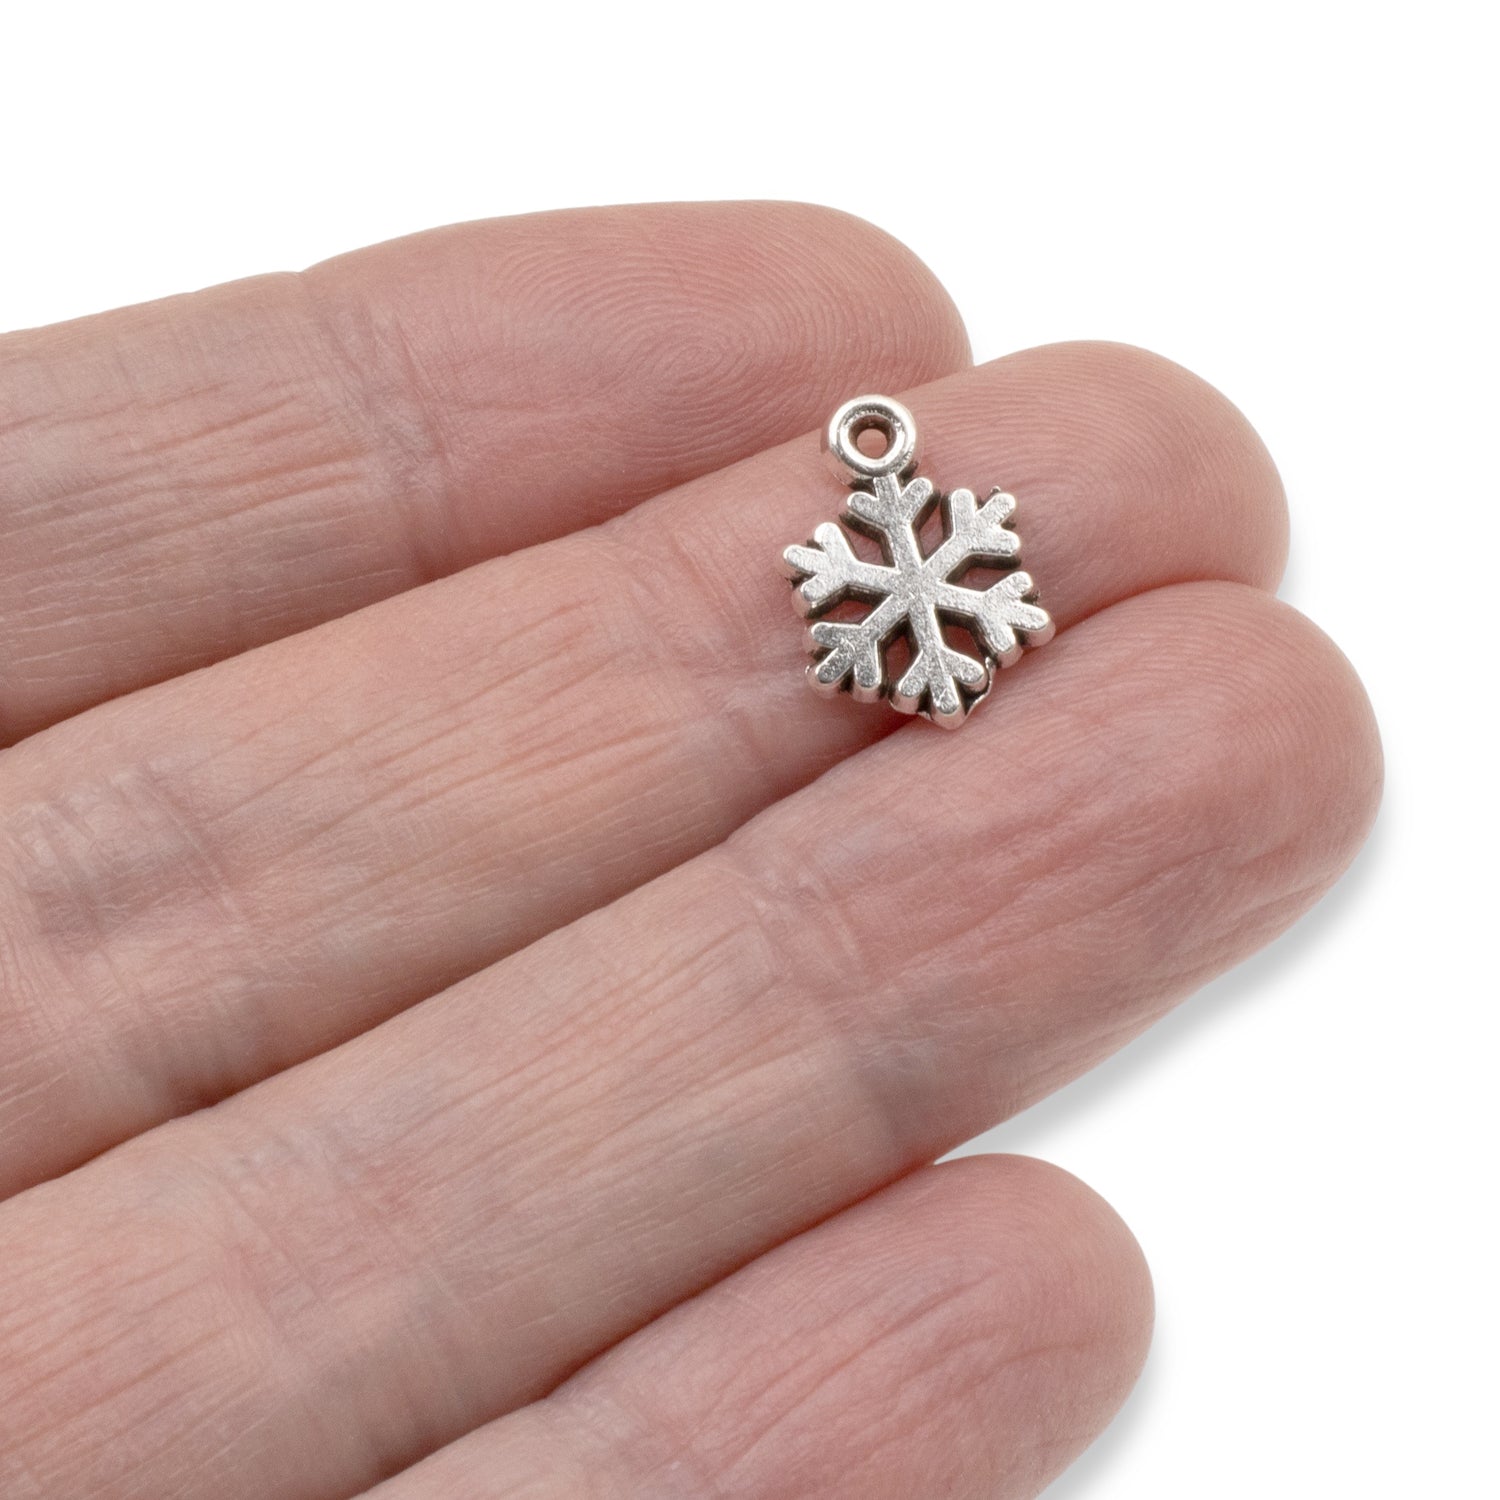 4, 20 or 50 Pieces: Silver Christmas Winter Snowflake Charms – Guerrilla  Charm